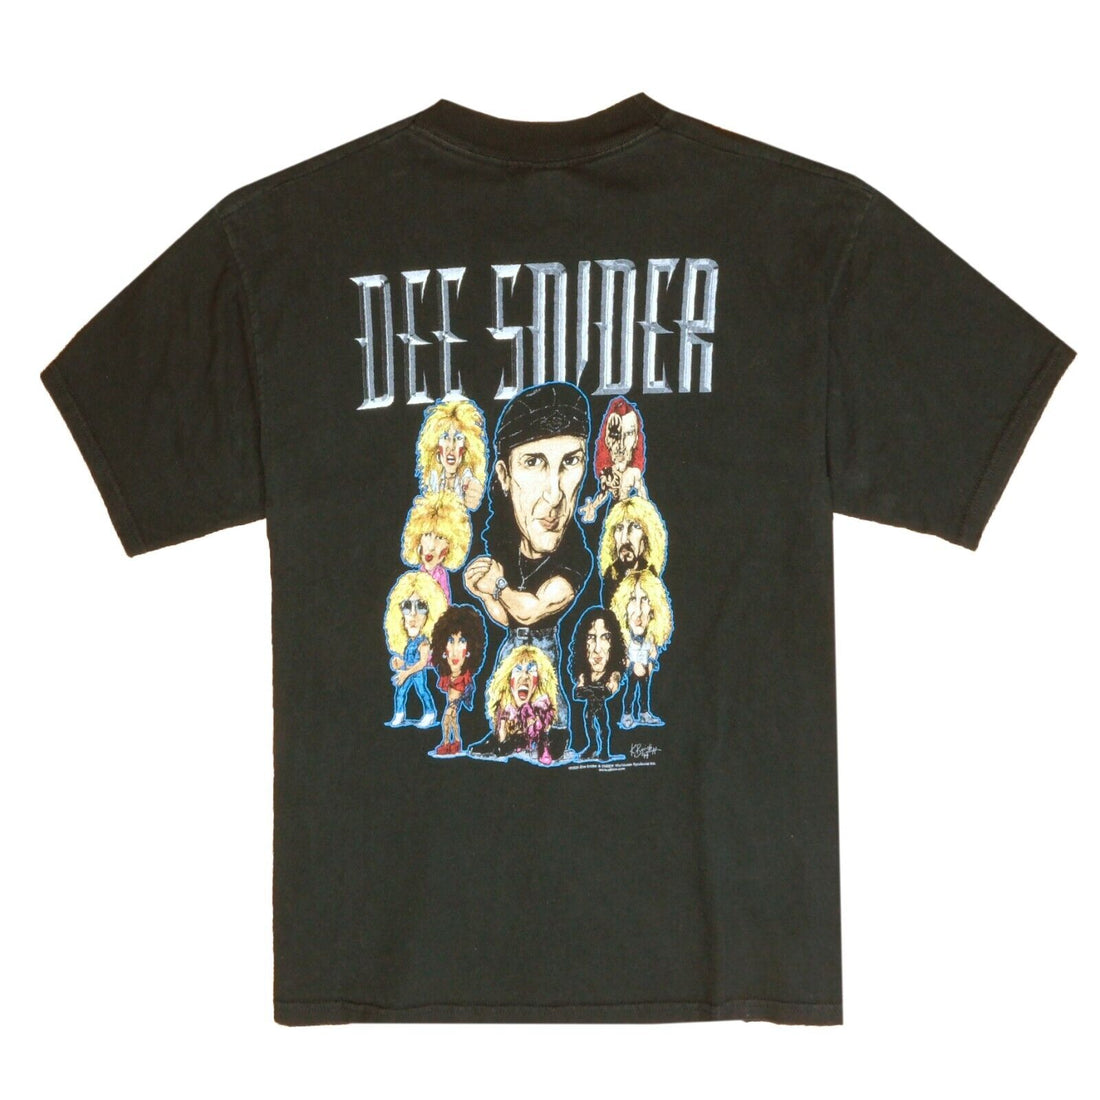 Vintage Dee Snider and SKREW Caricatures T-Shirt Size XL 1999 90s Band Tee